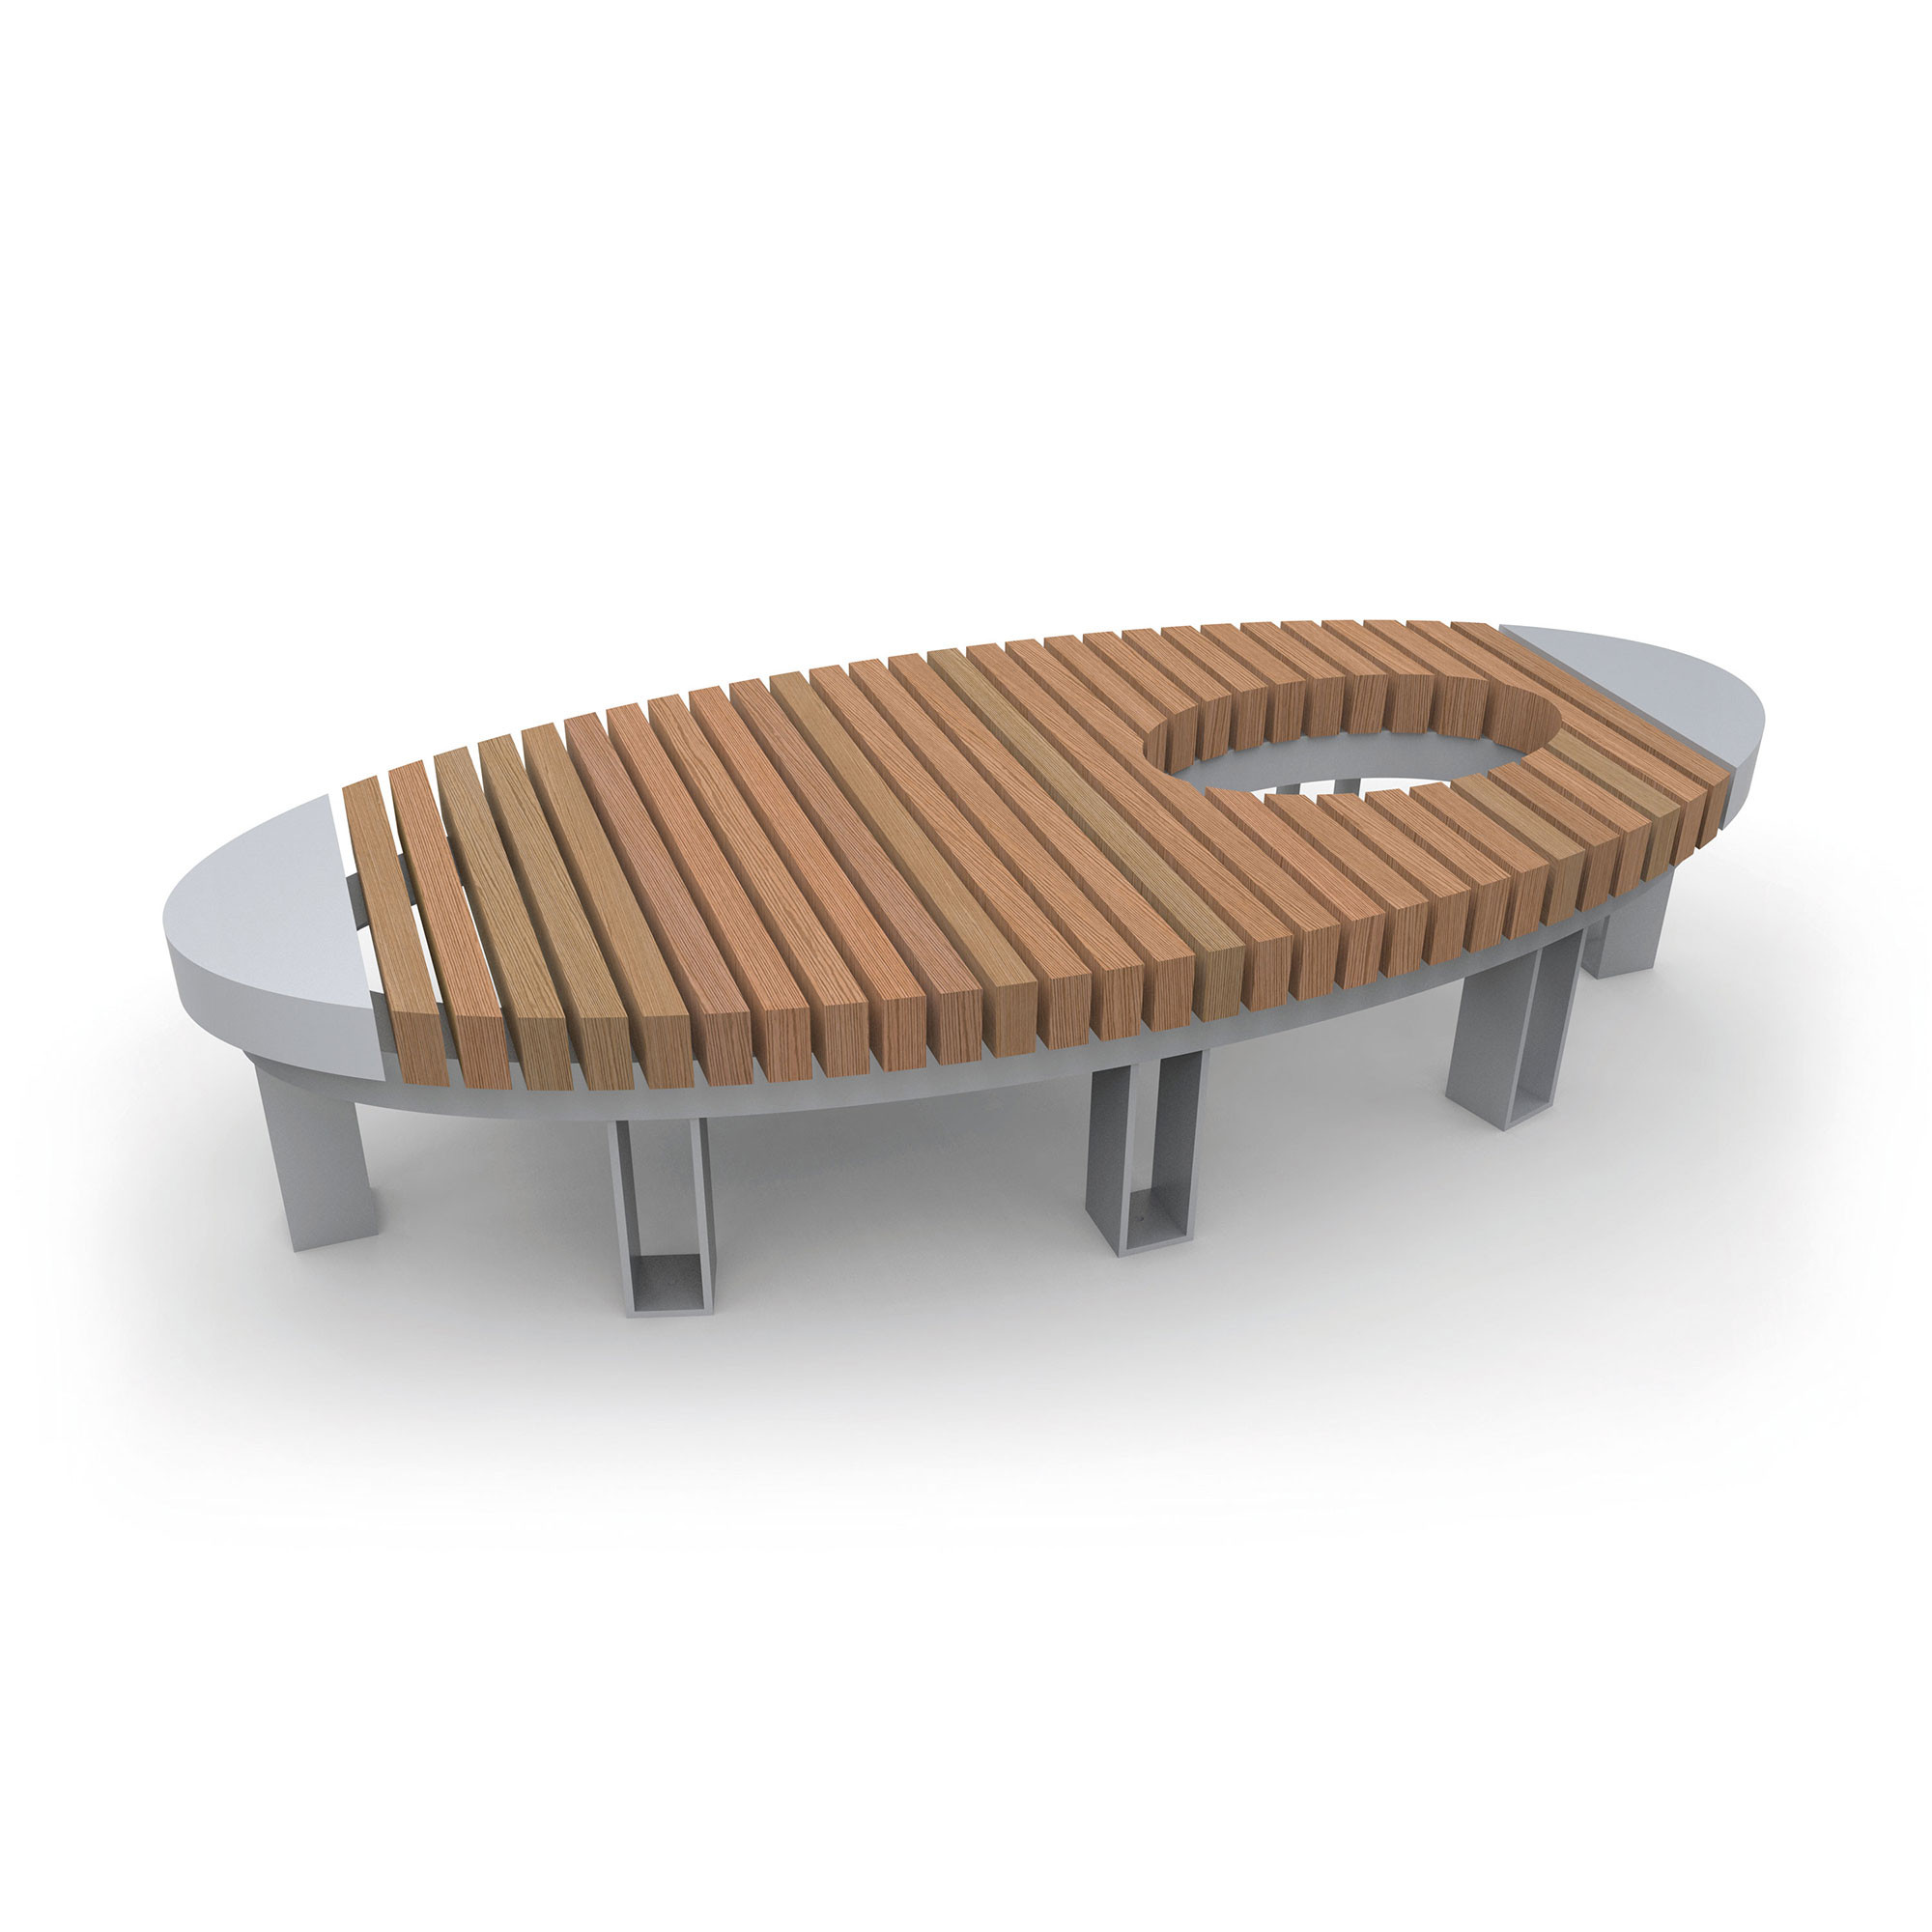 Lime Grove Backless Bench : Tree Void